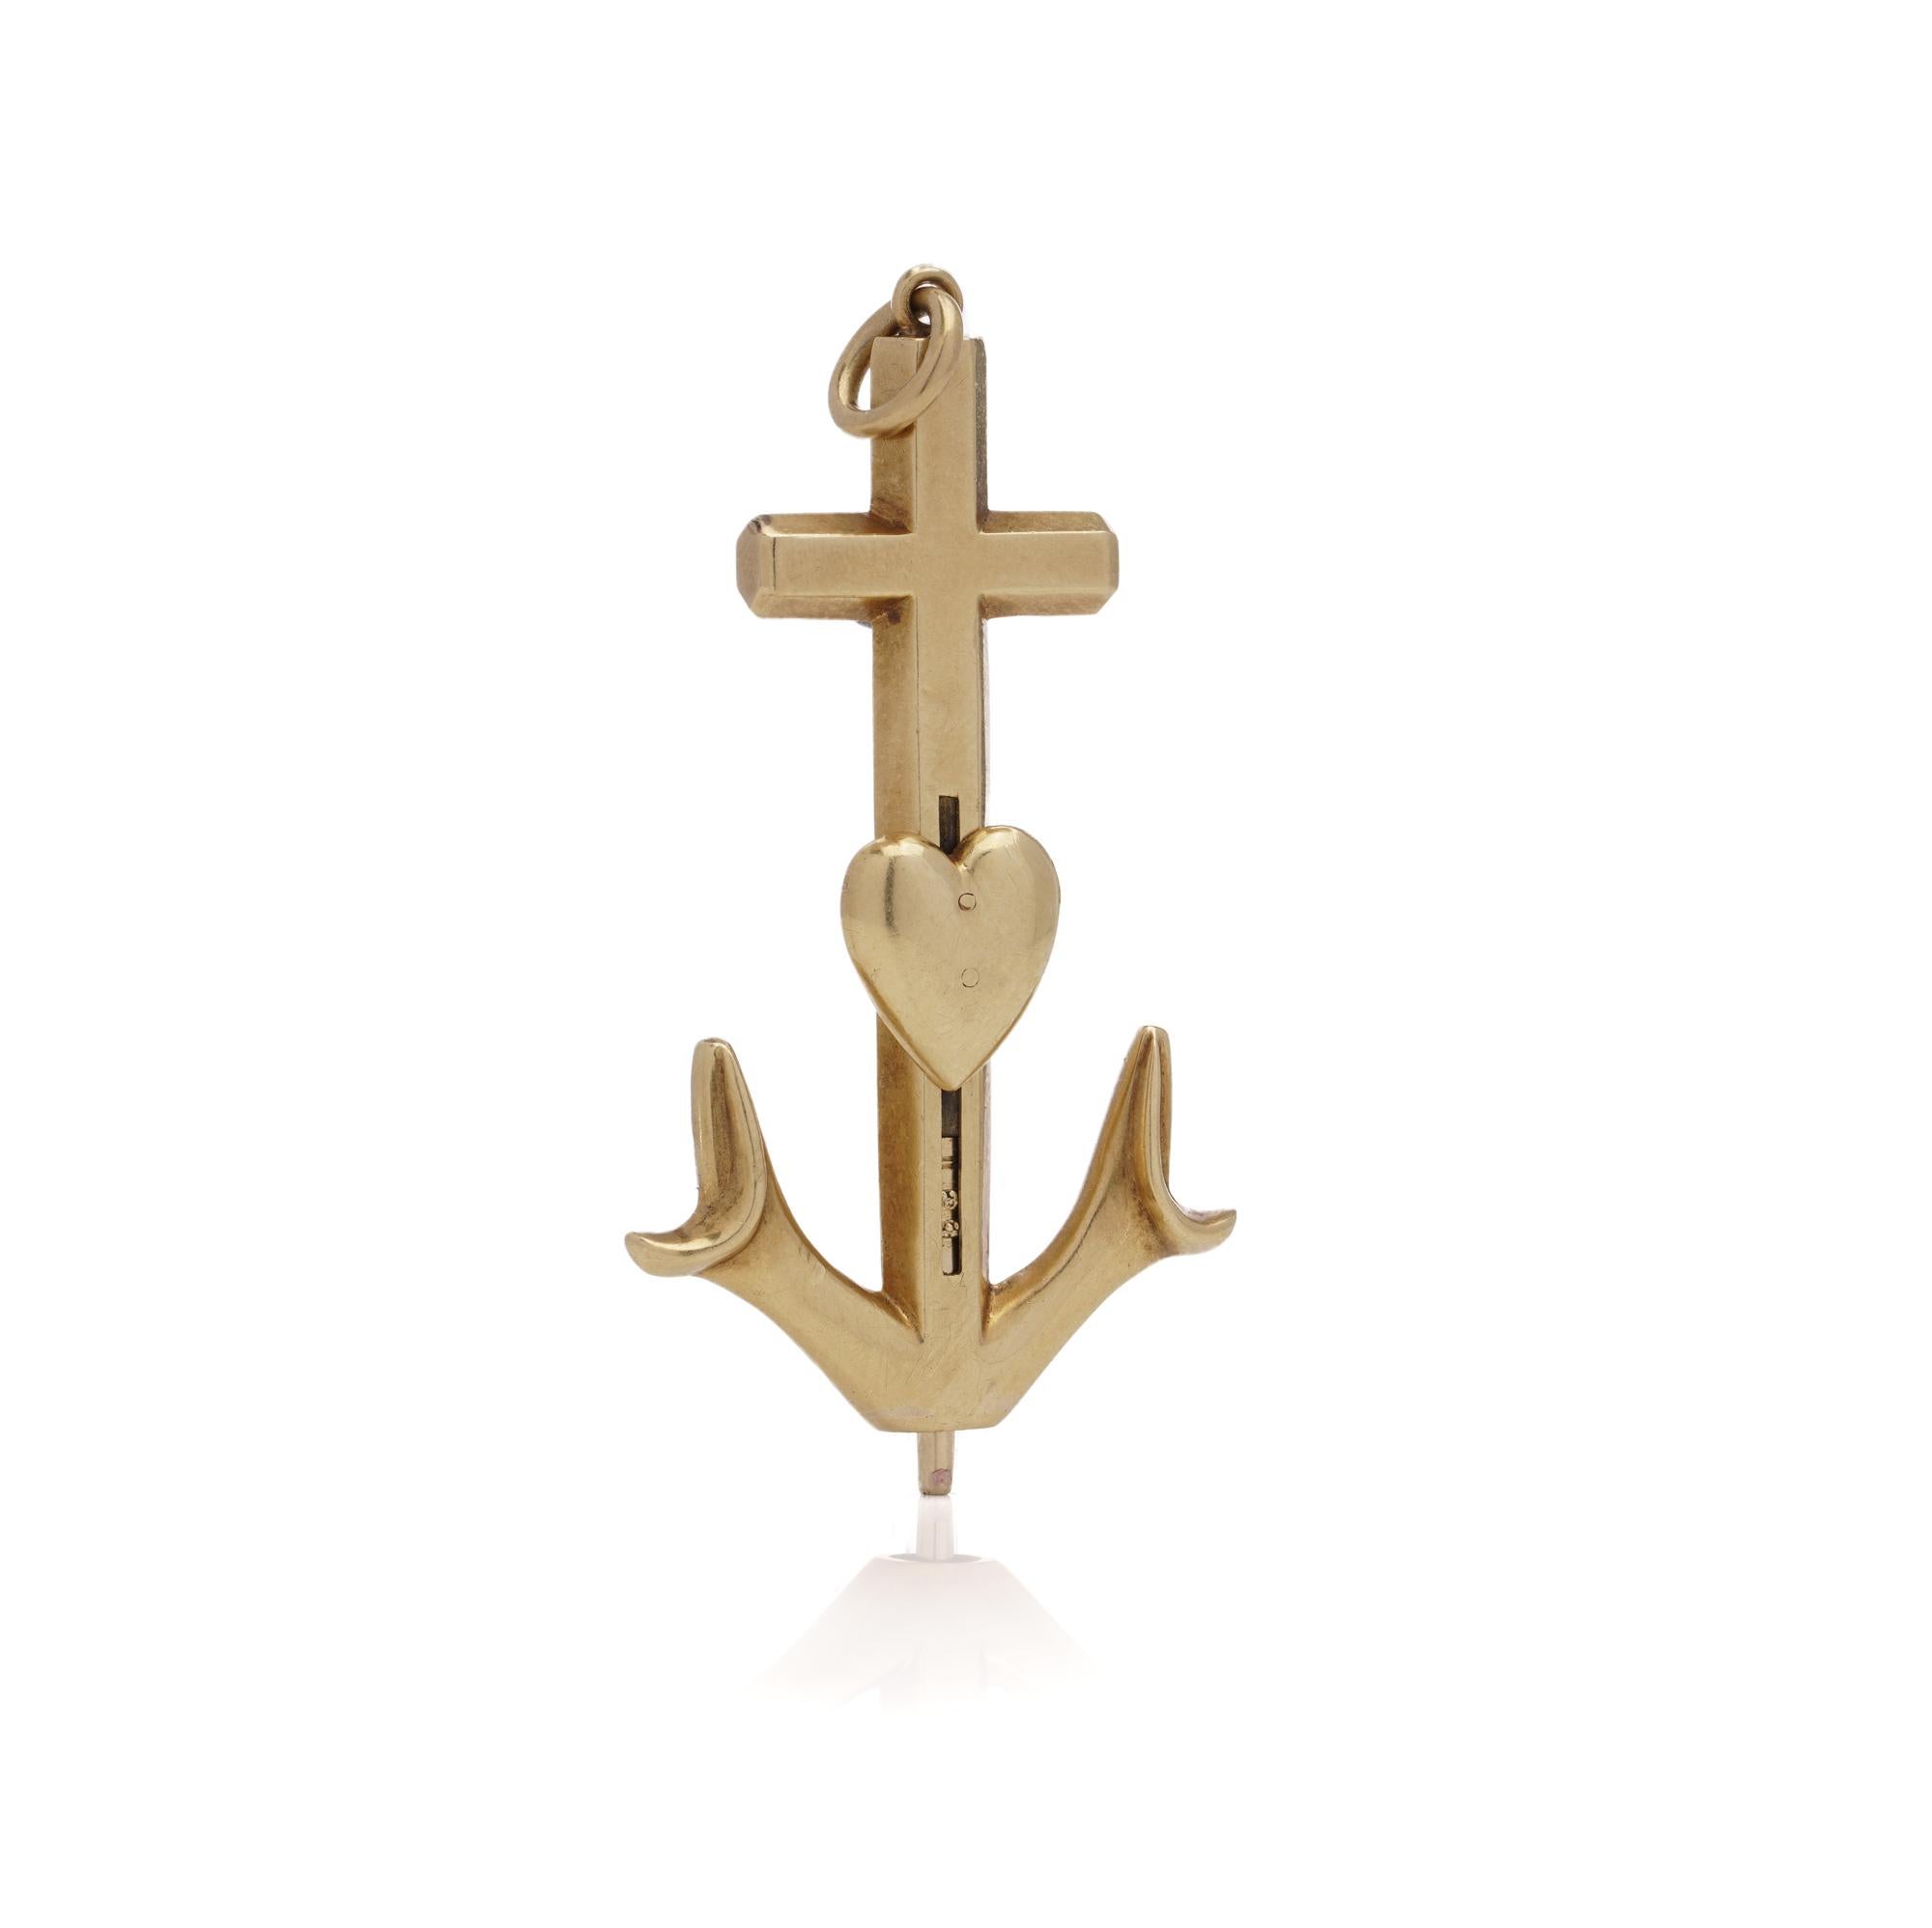 Victorian 18kt yellow gold pendant featuring an anchor, cross, and heart motif, symbolizing faith, hope, and charity respectively. The pendant doubles as a propelling pencil, with a convenient slide-action mechanism for opening. Complete with an